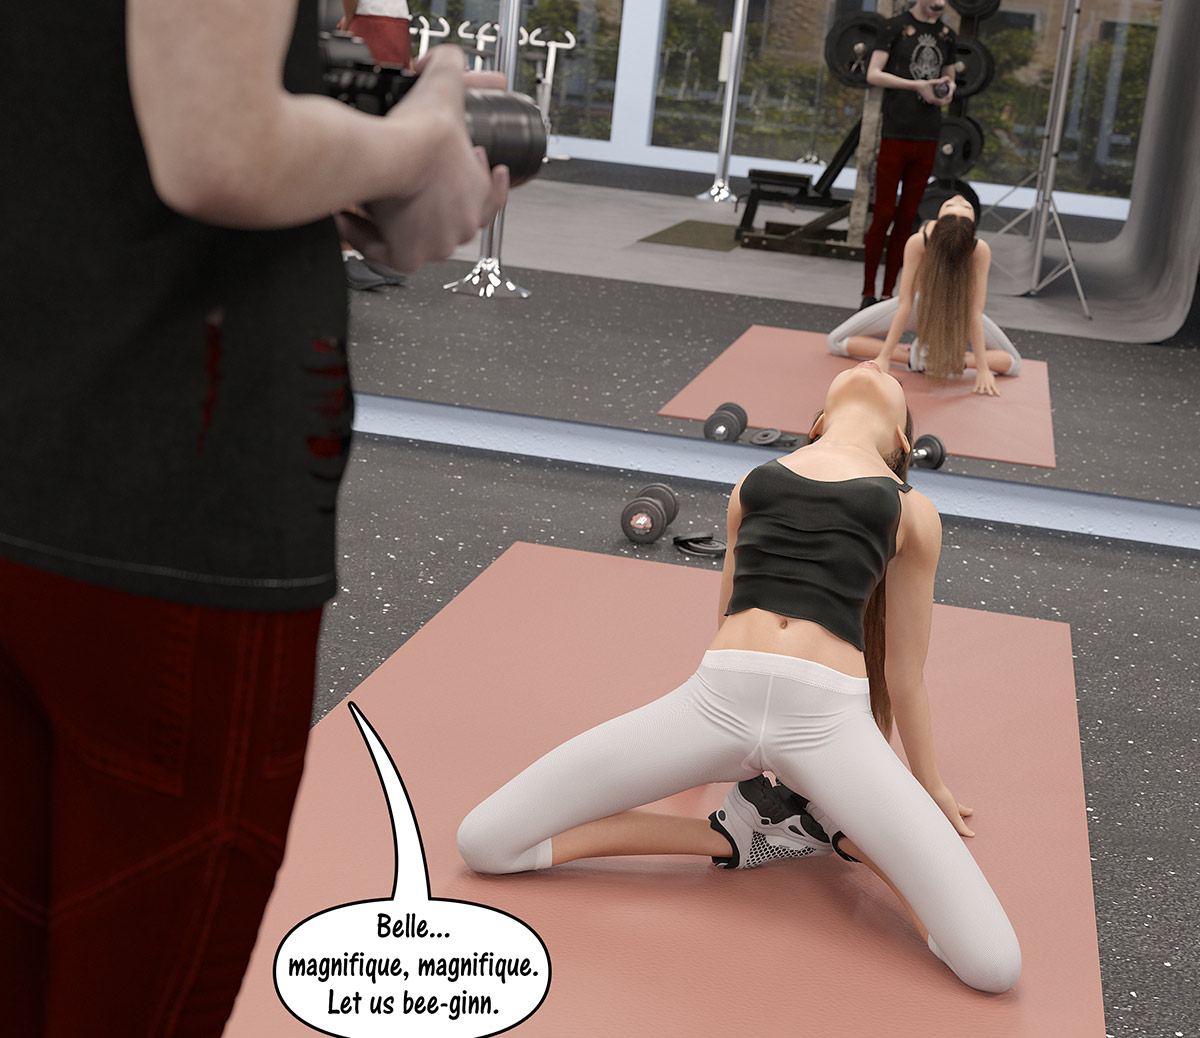 Stretching out like this with only a thin layer between me and the men watching - Natasha gym 2